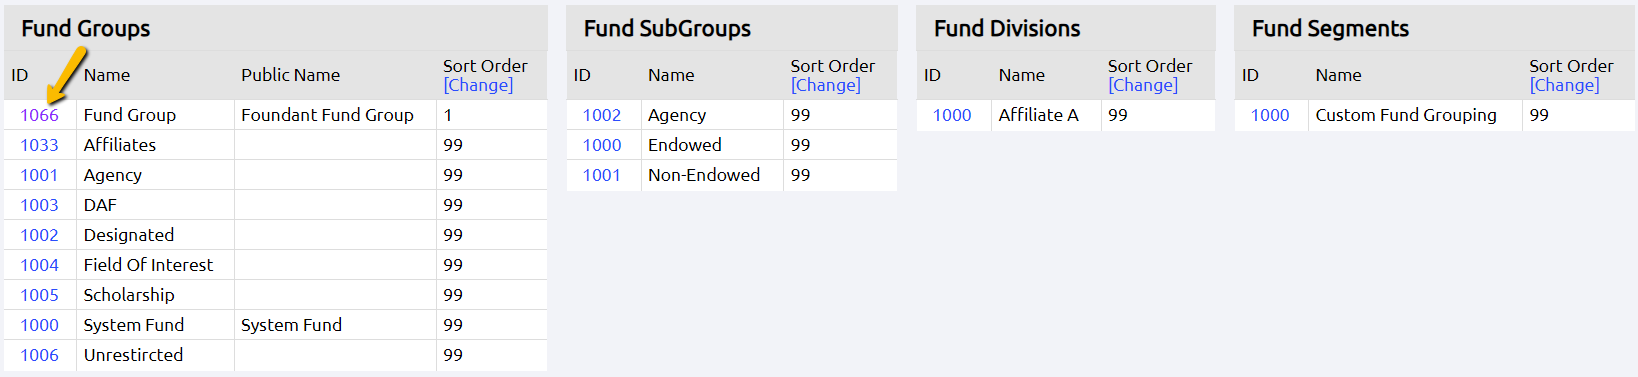 fund group ID